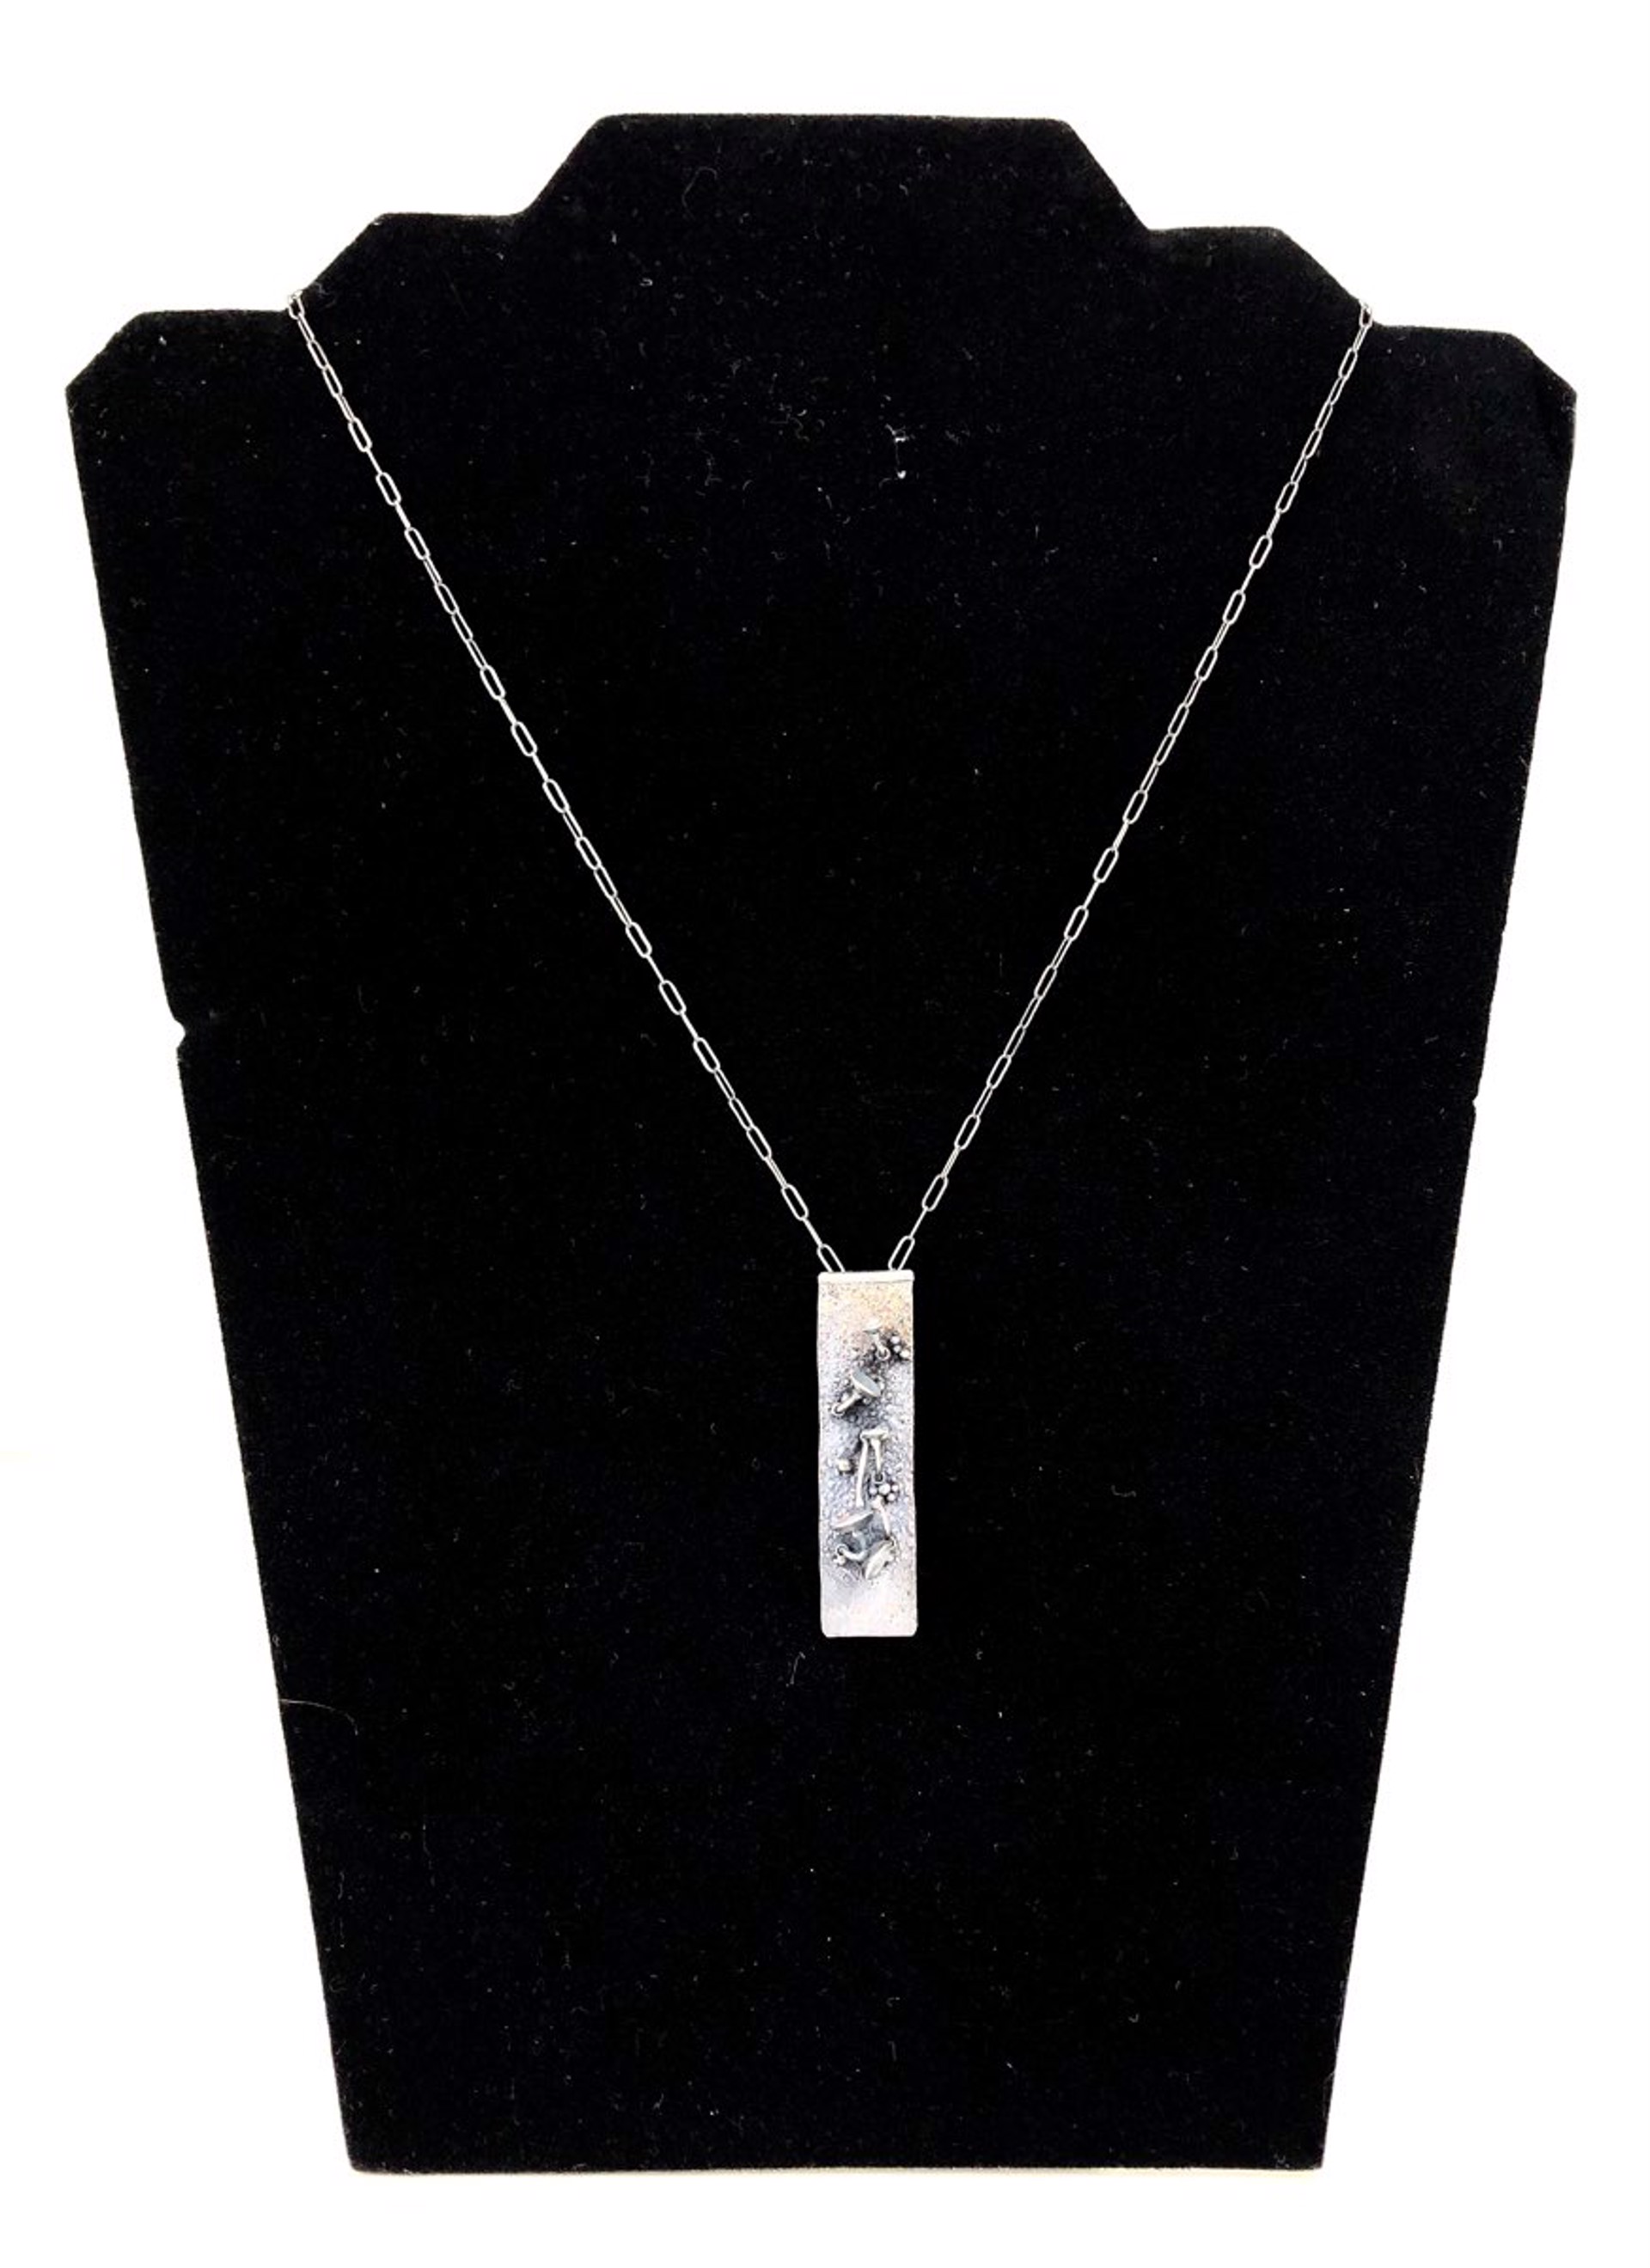 Cups Pendant with Silver Chain by Theresa St. Romain